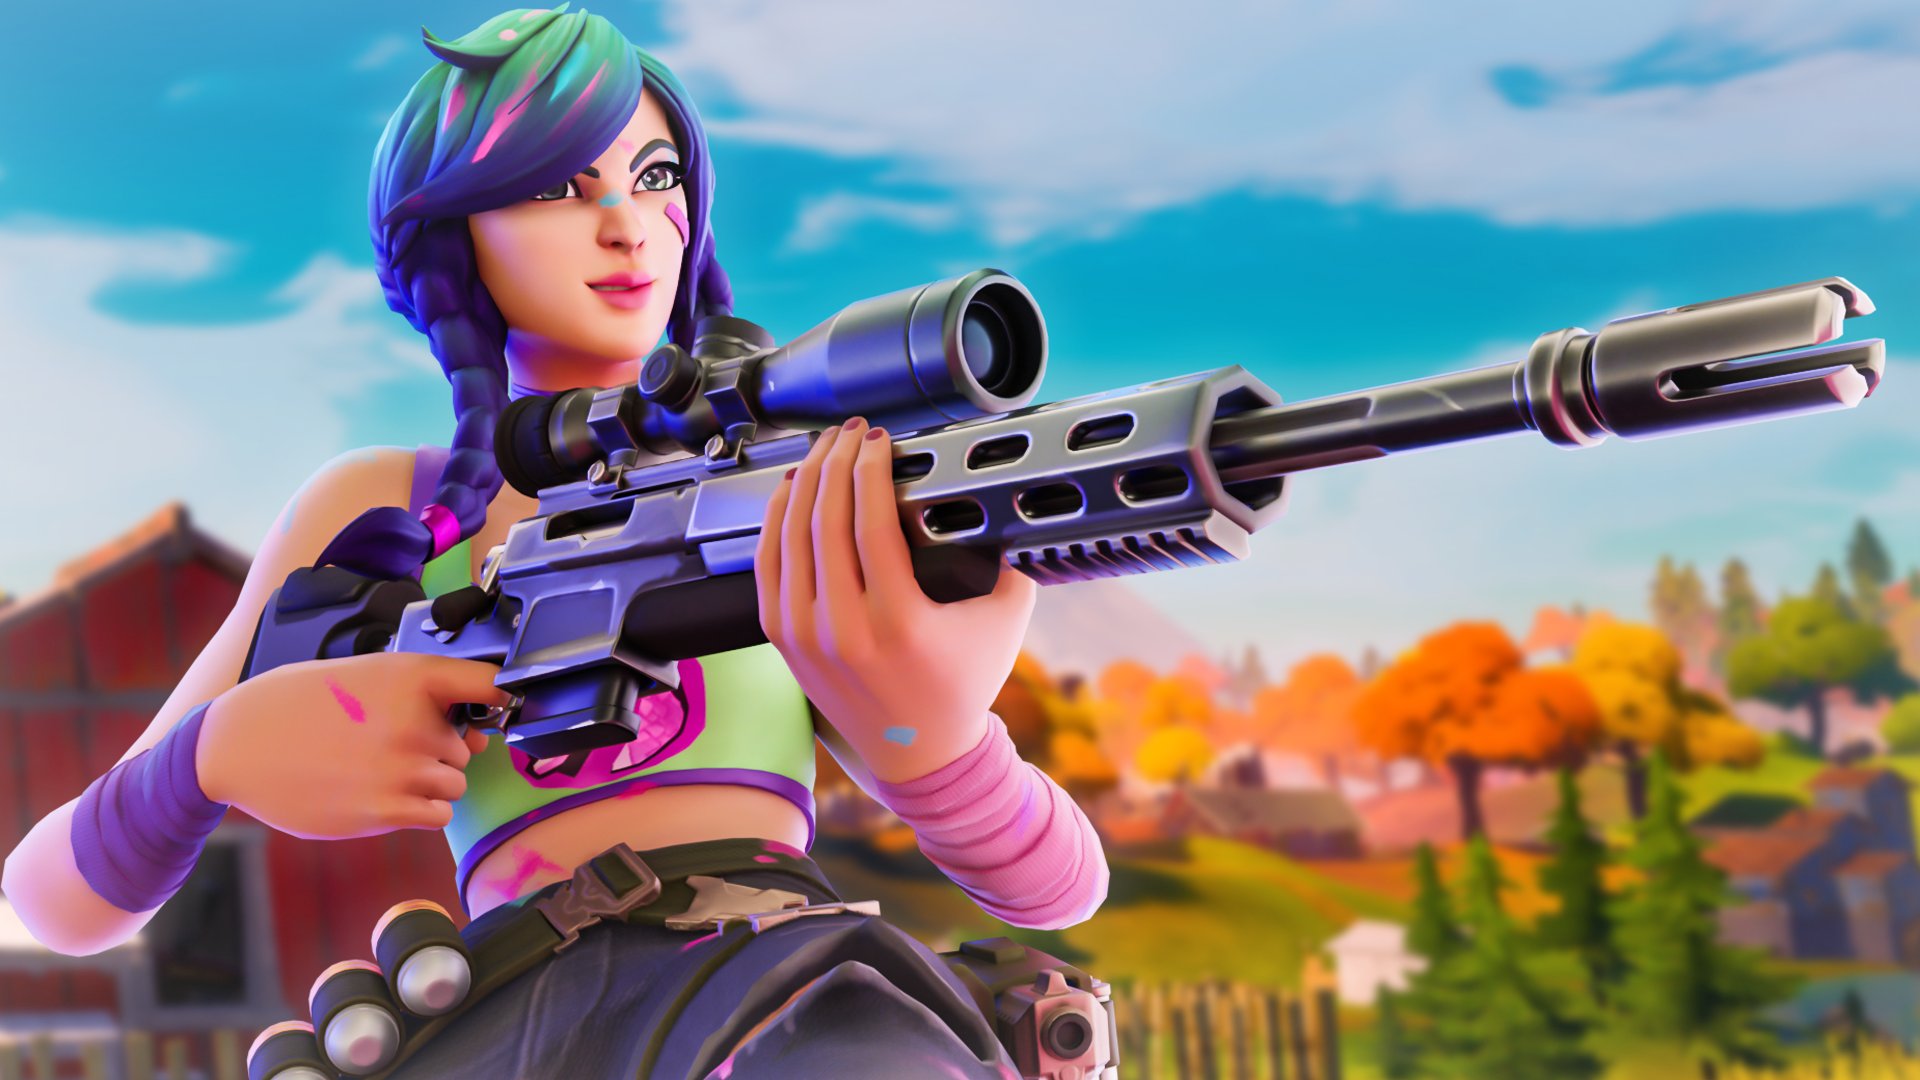 Twitter এ Timtam Free To Use Splaterella Thumbnail I M Home From My Holiday So My Commissions Are Open Fortnite Fortniteart Fortniteprimal Hacker Fortnitethumbnail Fortnitethumbnails Fortniteseason6 Gfx Gfxdesigner Designer